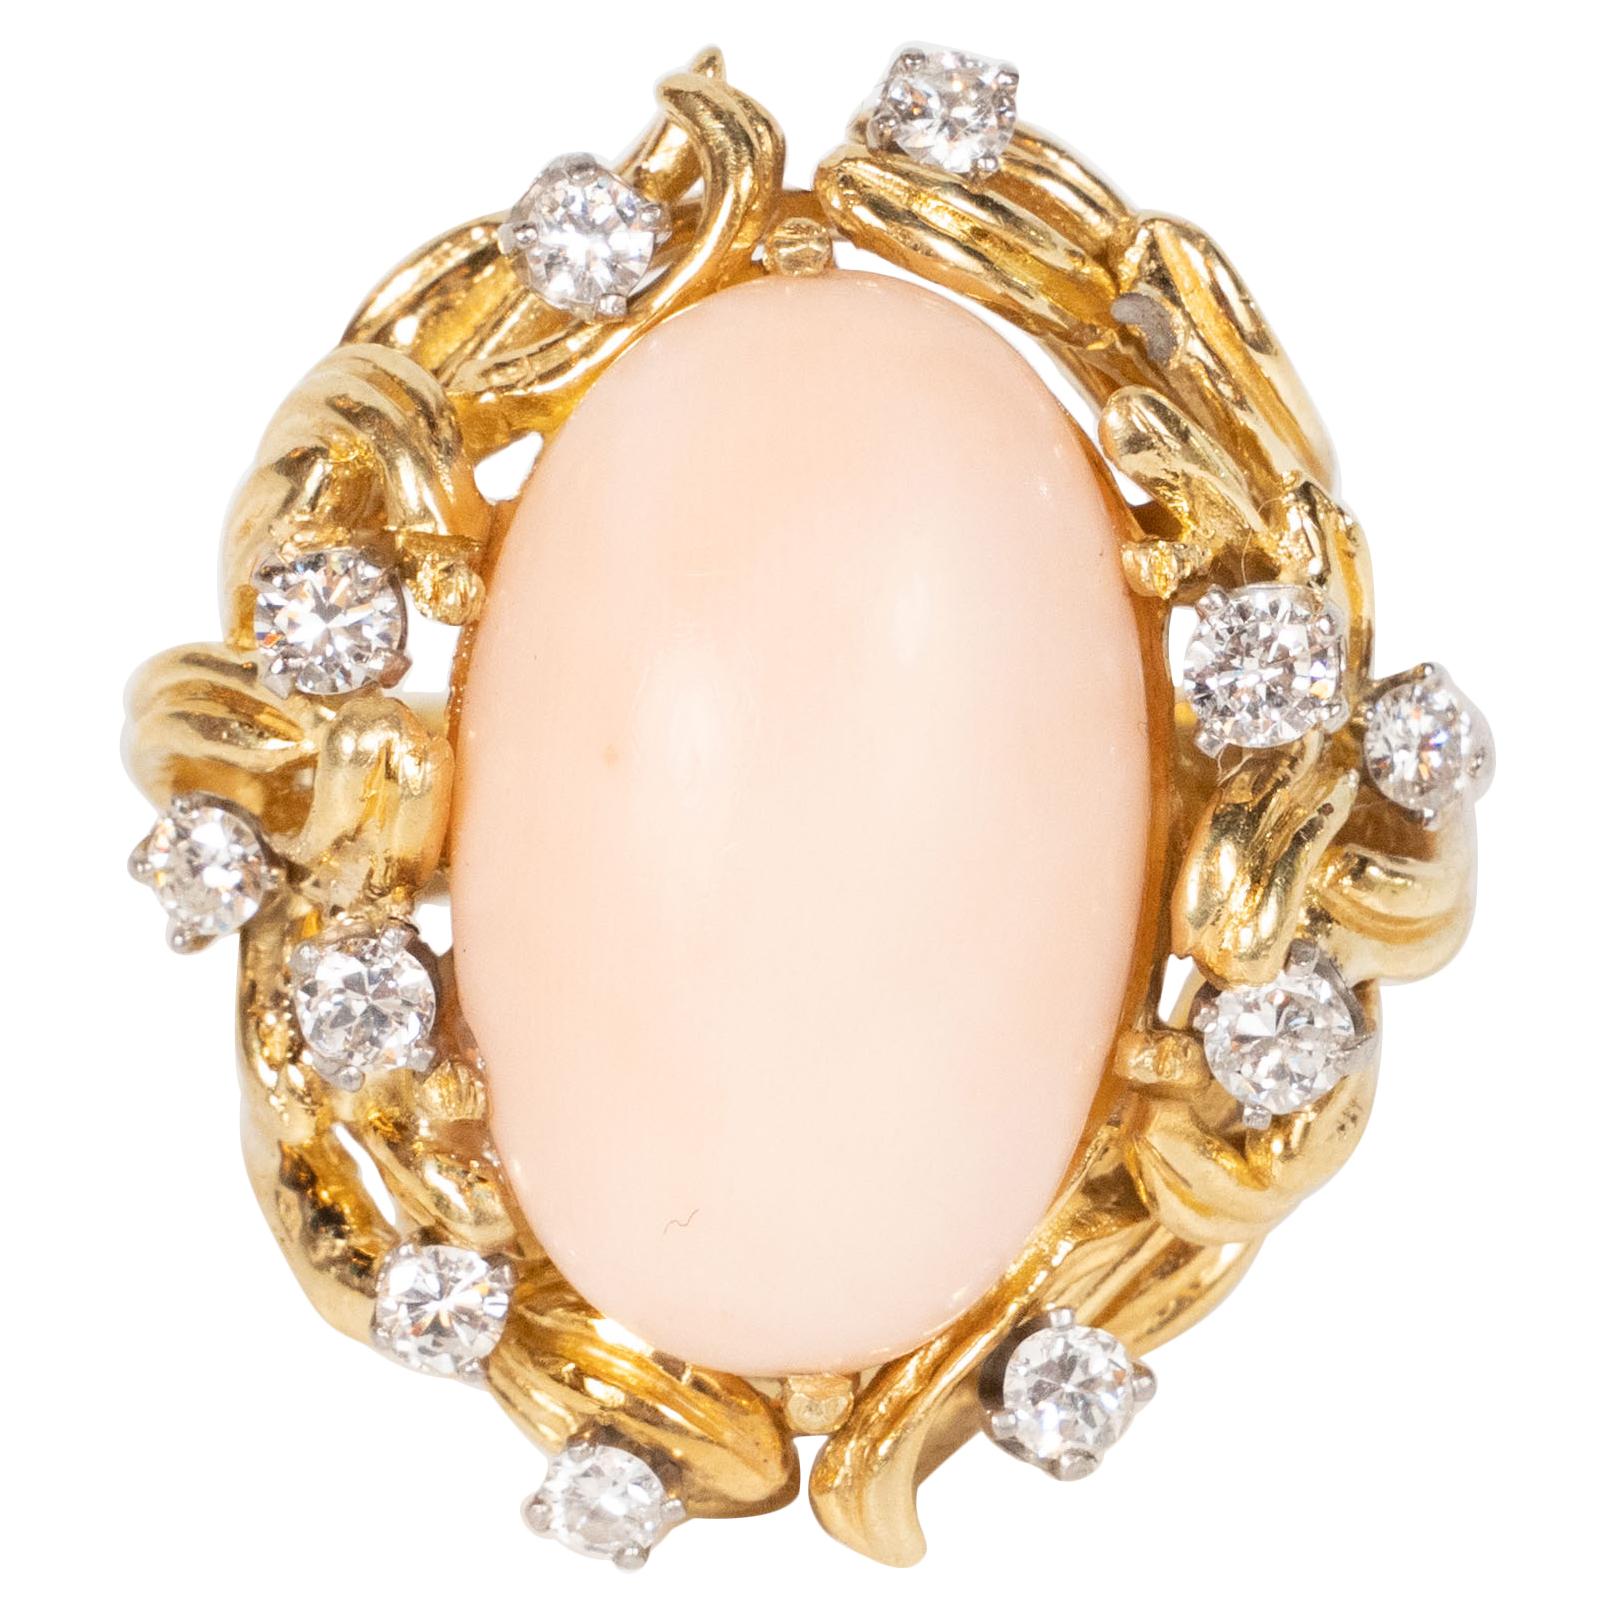 This Mid-century cocktail ring was hand crafted in the United States, circa 1960. features a domed angel coral stone set in a 14k yellow gold designed with stylized foliate tendril details supporting 12 full cut fine diamonds. This ring is